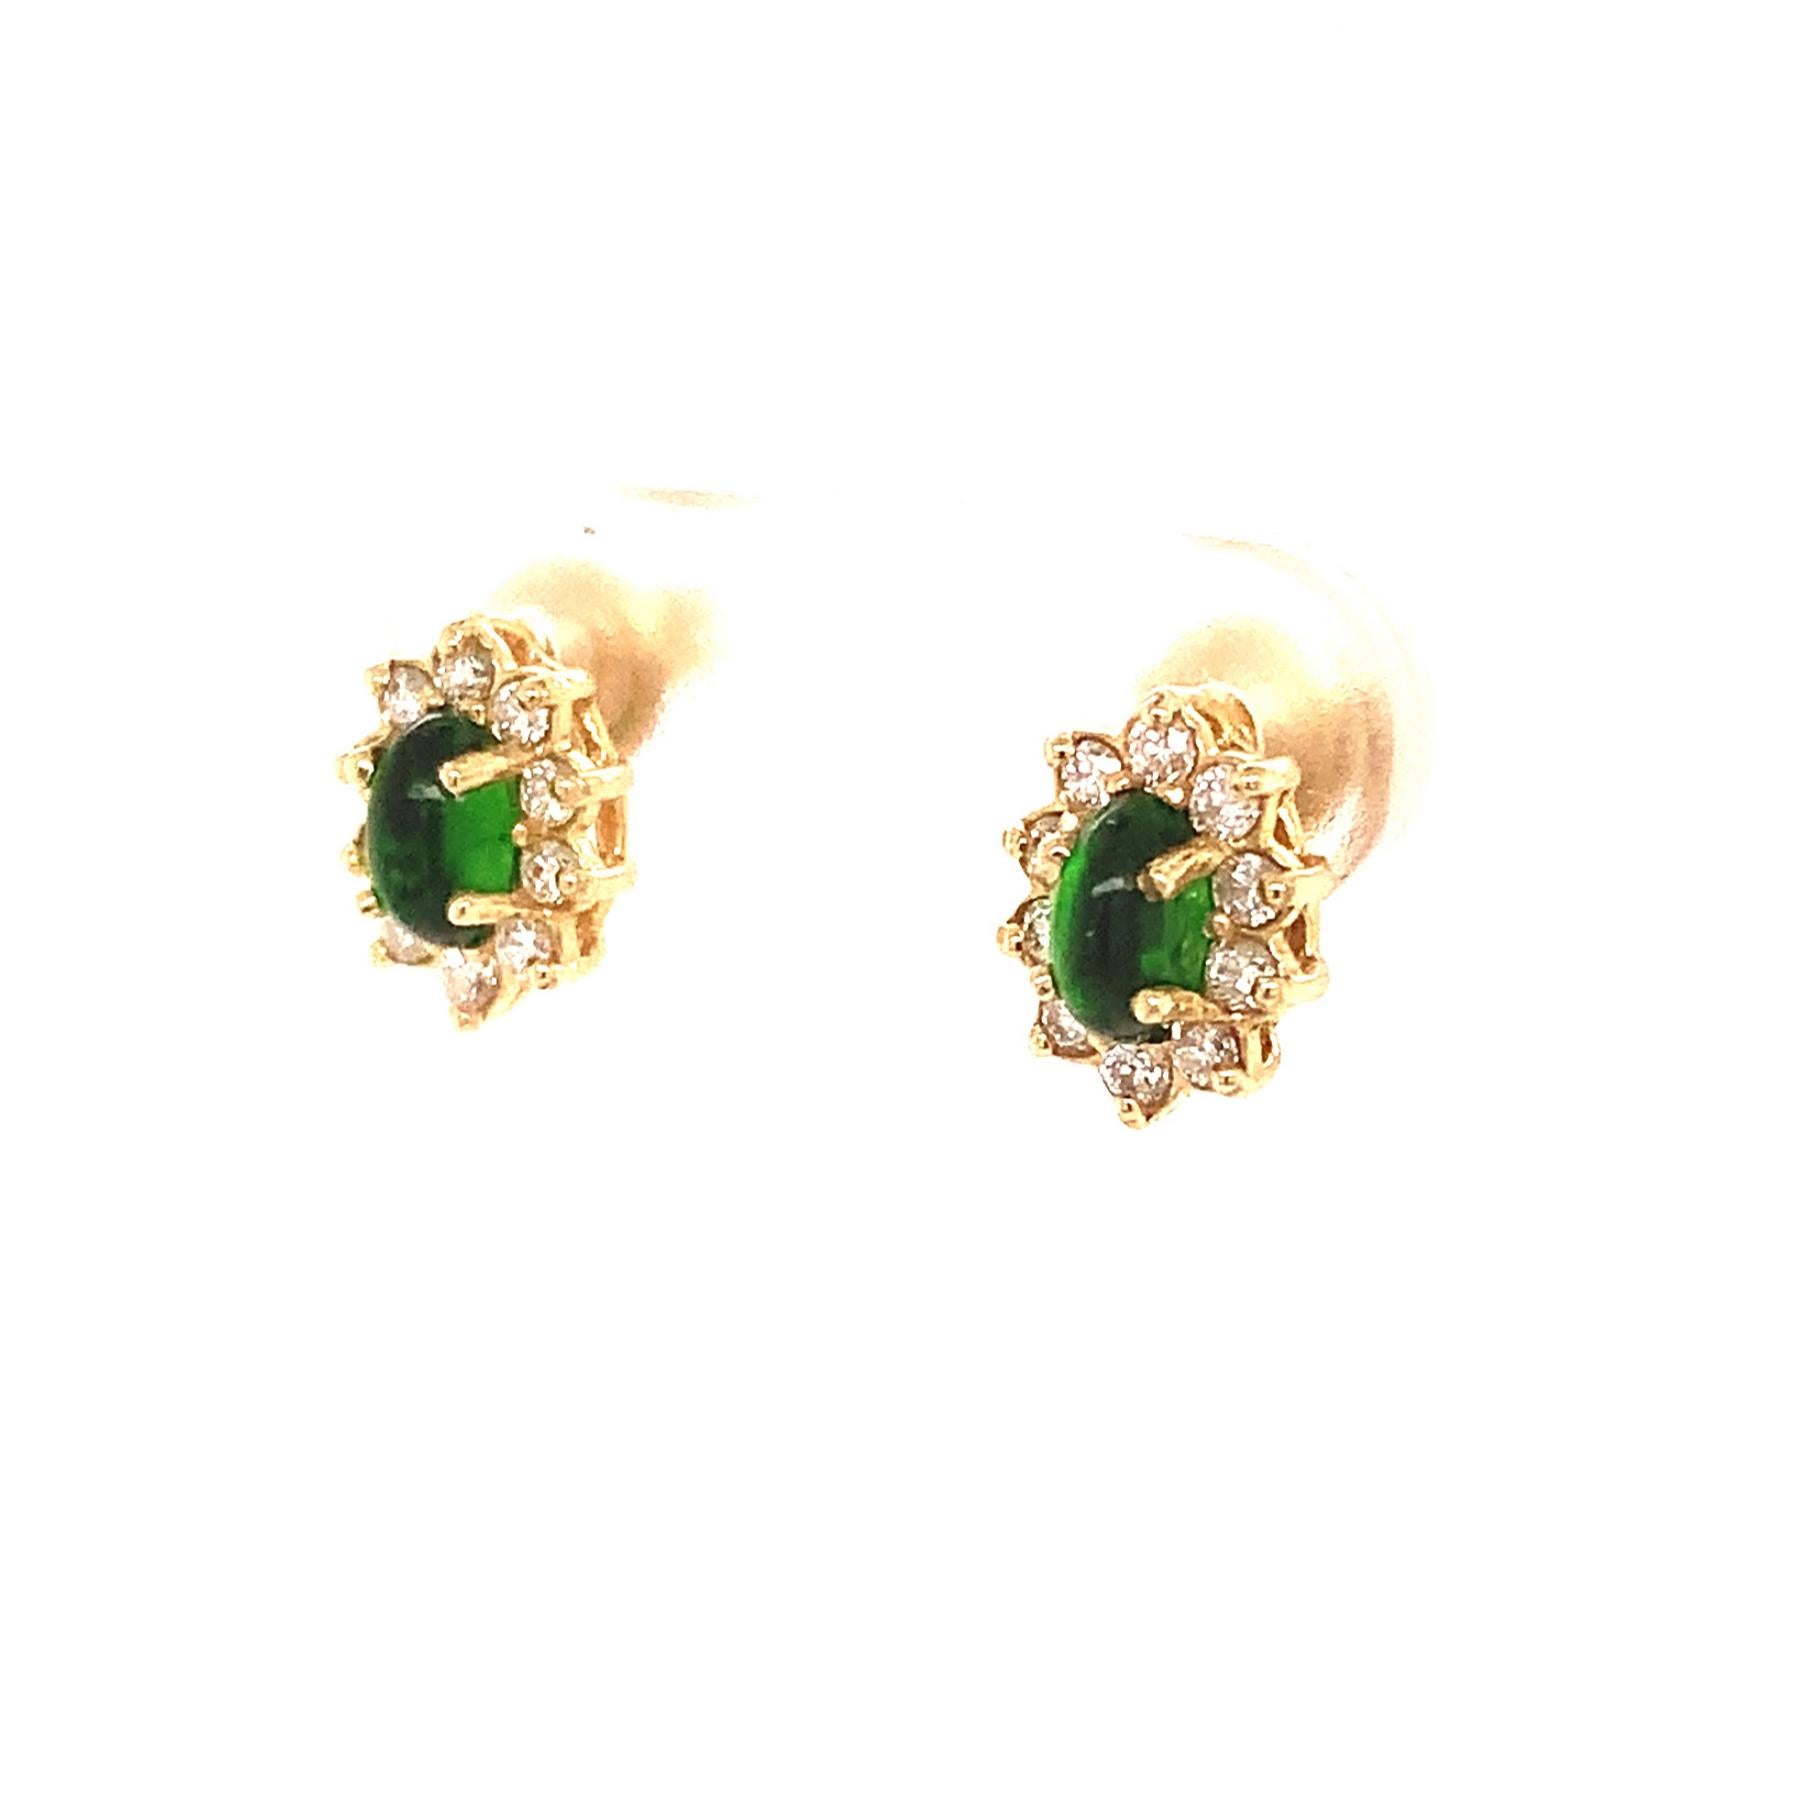 Natural Tourmaline Diamond Earrings 14k Gold 0.85 TCW Certified In New Condition For Sale In Brooklyn, NY